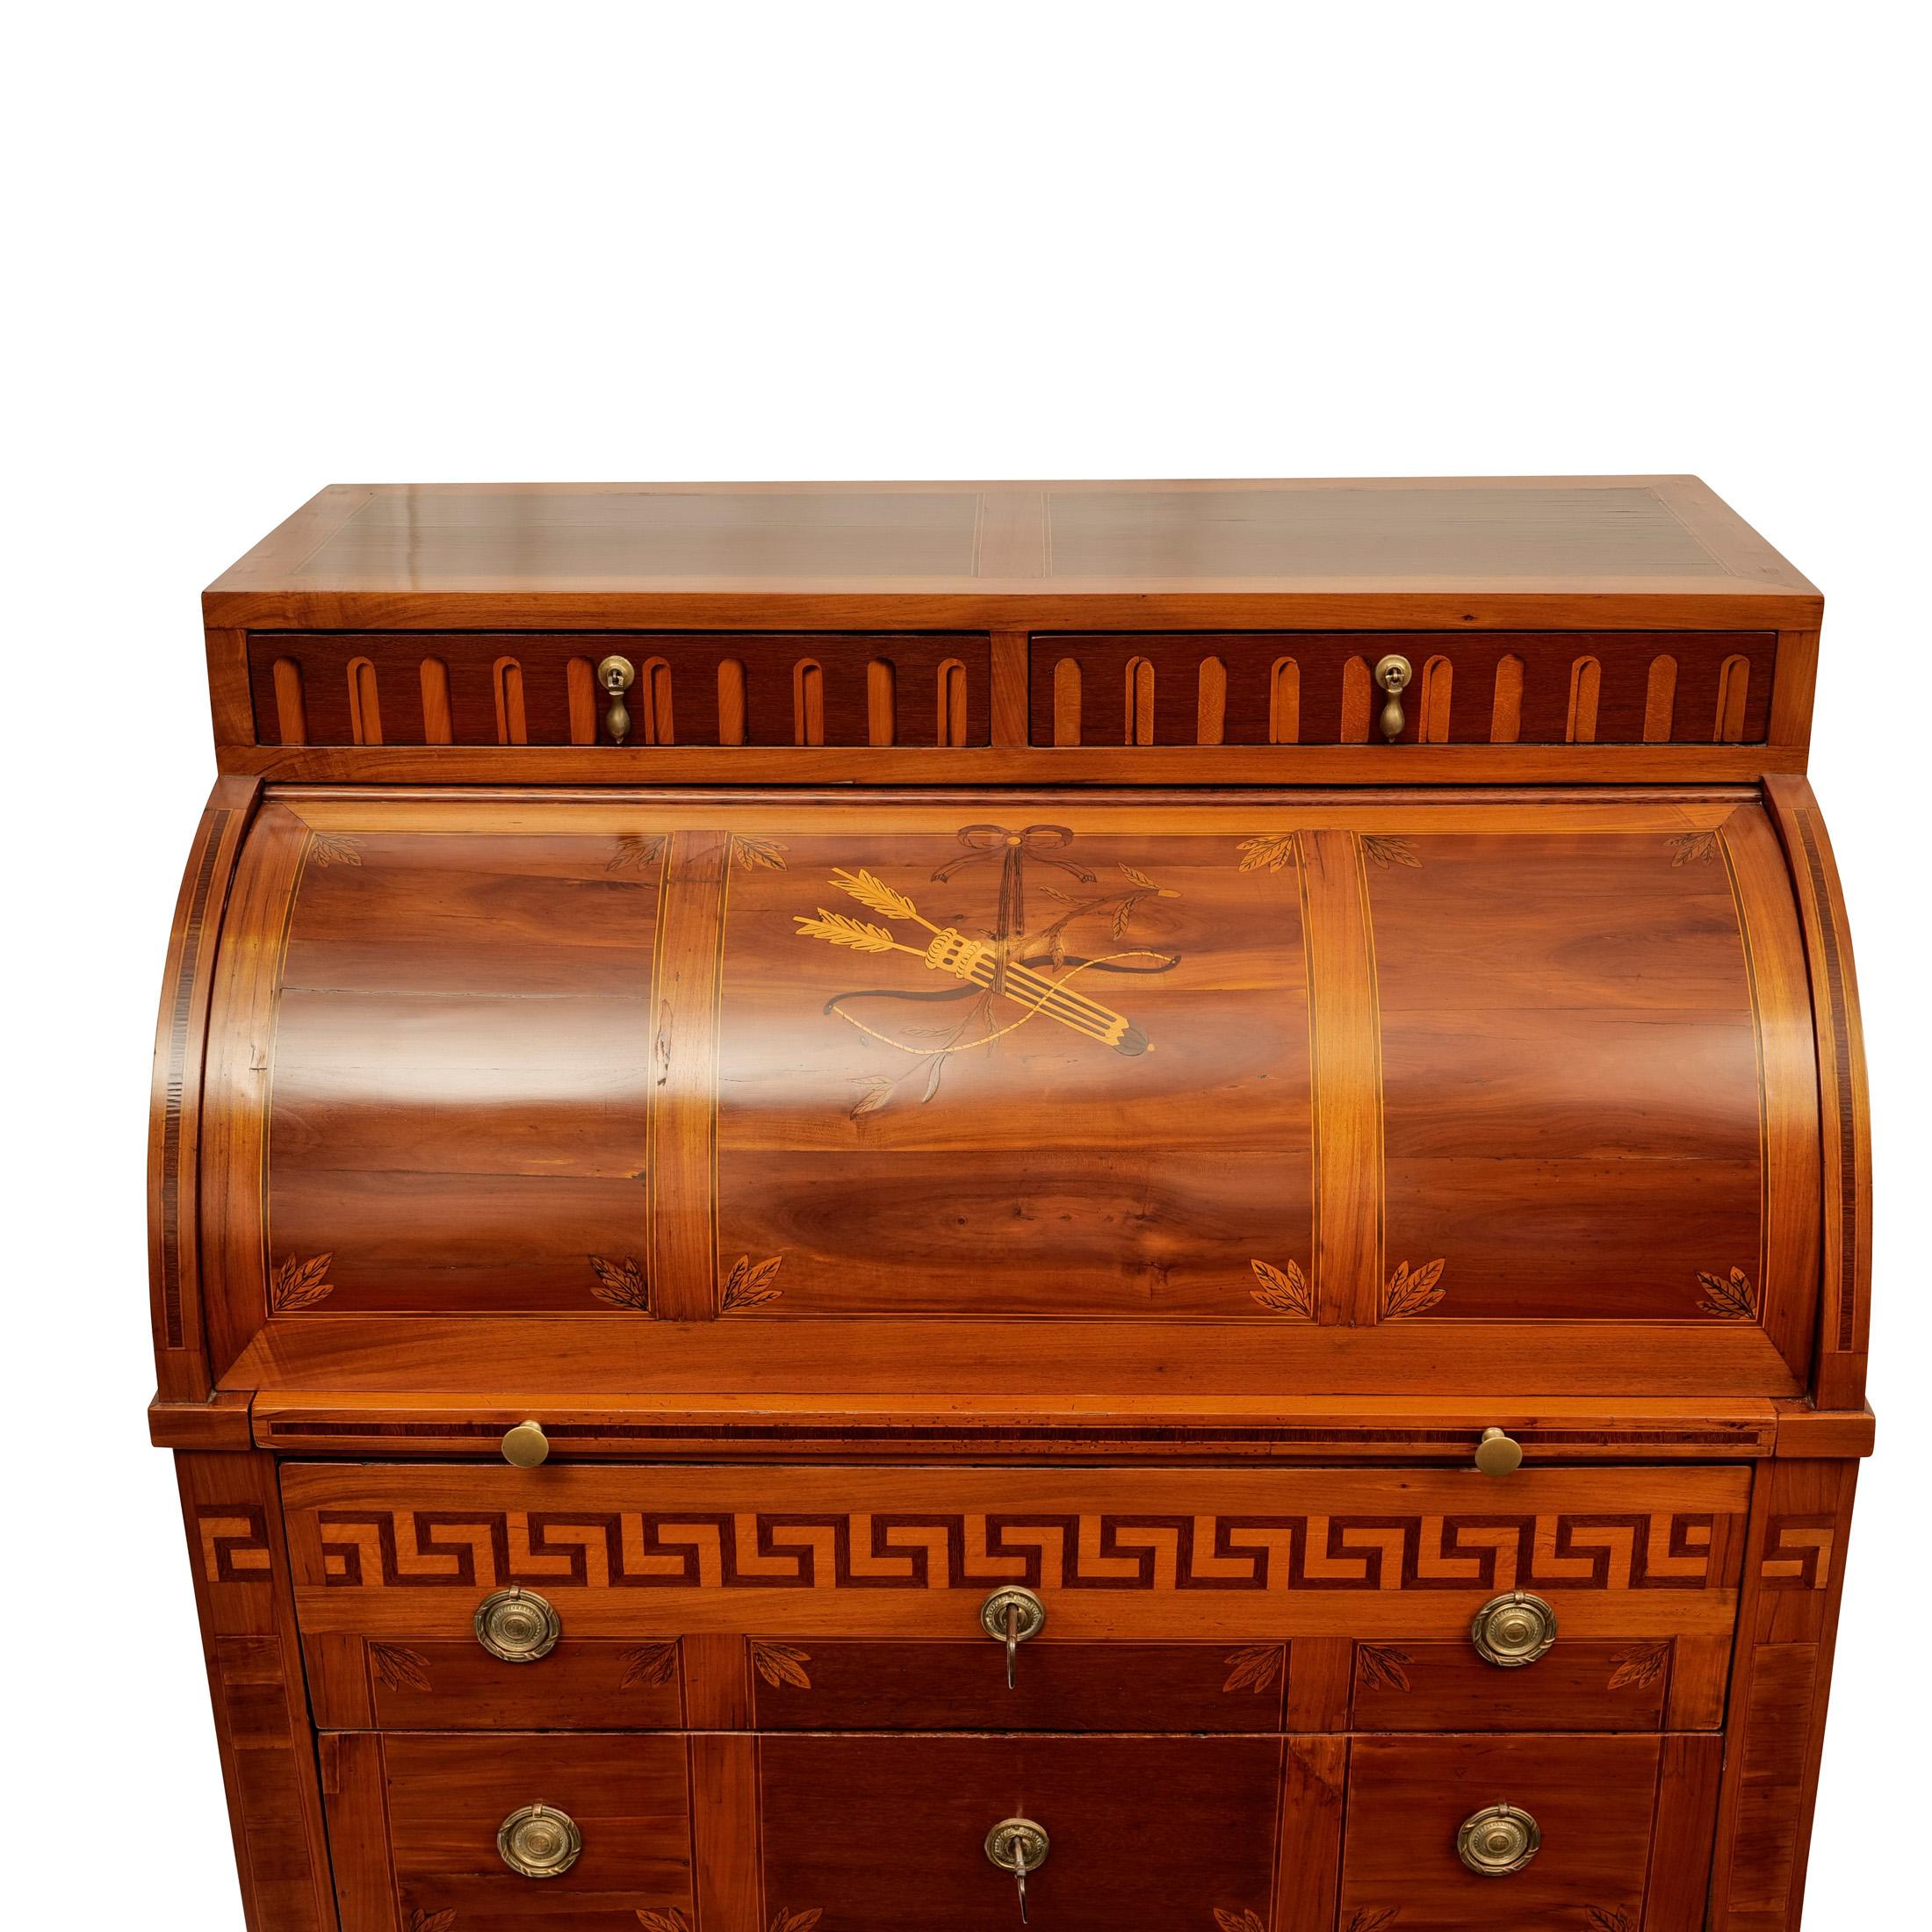 Cylinder bureau, Westphalia circa 1800, walnut and other fine woods veneered on oak, marquetry work, partly fire shaded, fluting and meander frieze, on the cylinder closure depiction of bow and quiver with arrows, 2-bay chest of drawers, cylinder